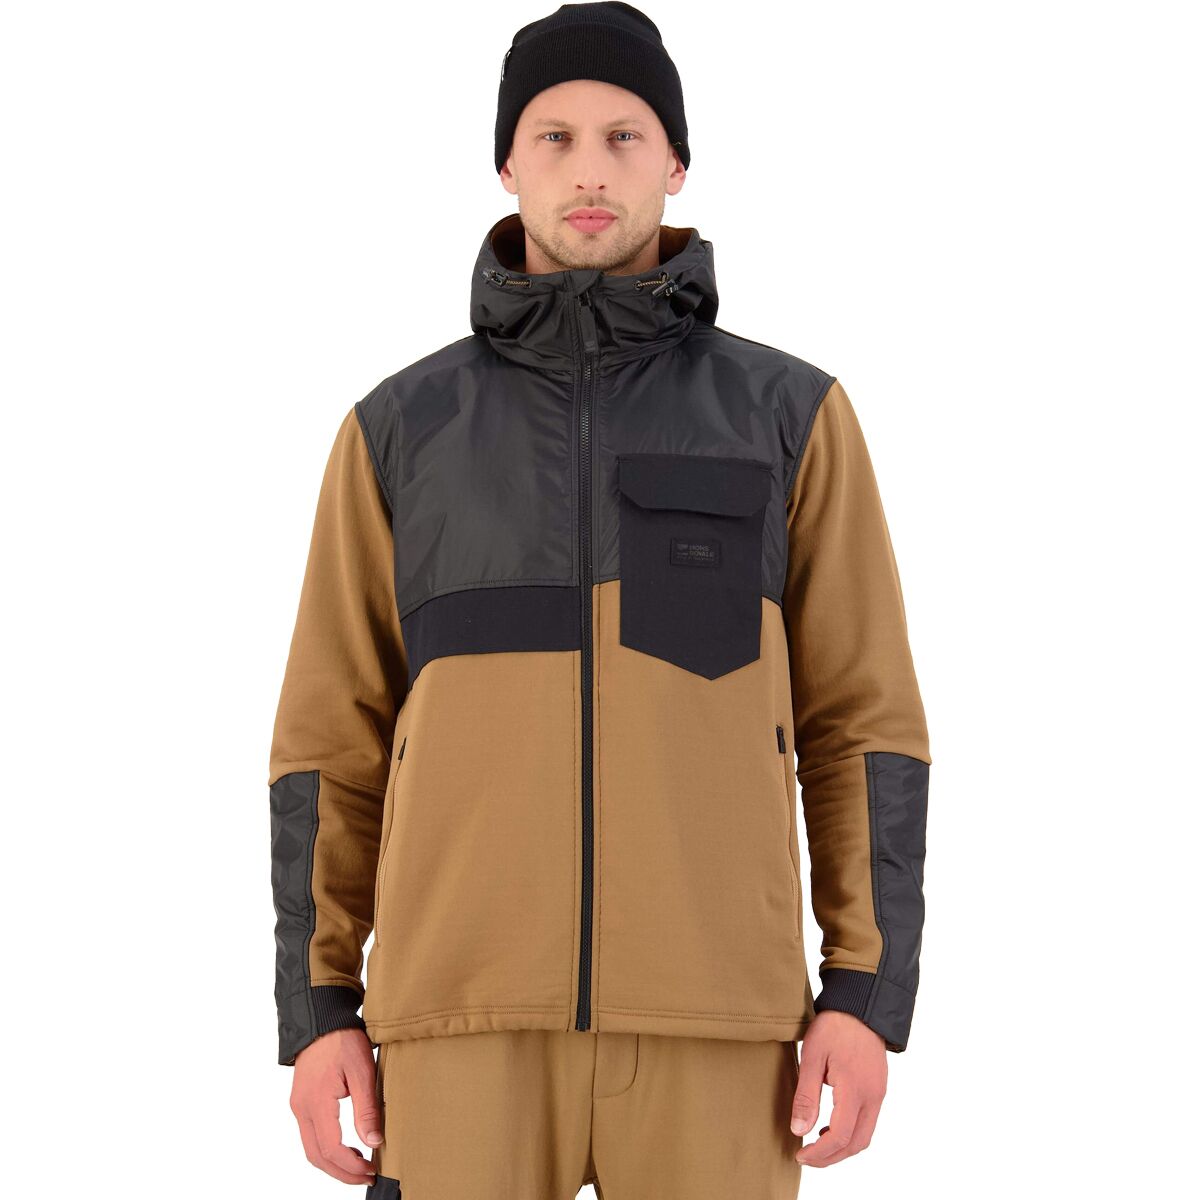 Mons Royale Decade Tech Mid Pullover Jacket - Men's